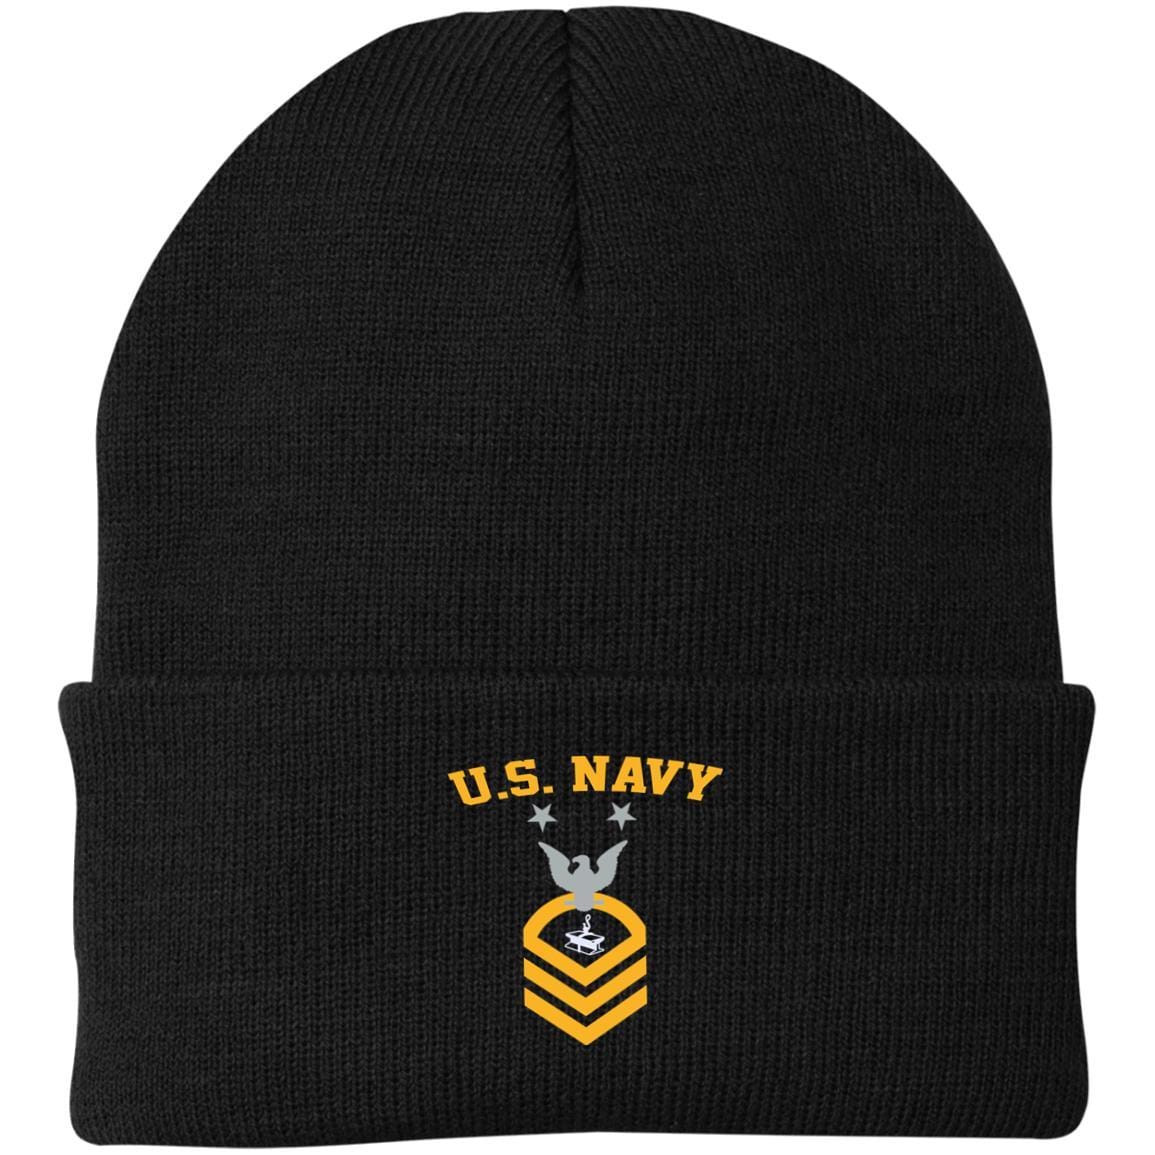 Us Navy Steelworker Sw E-9 Rating Badges Printed Port Authority Knit Cap